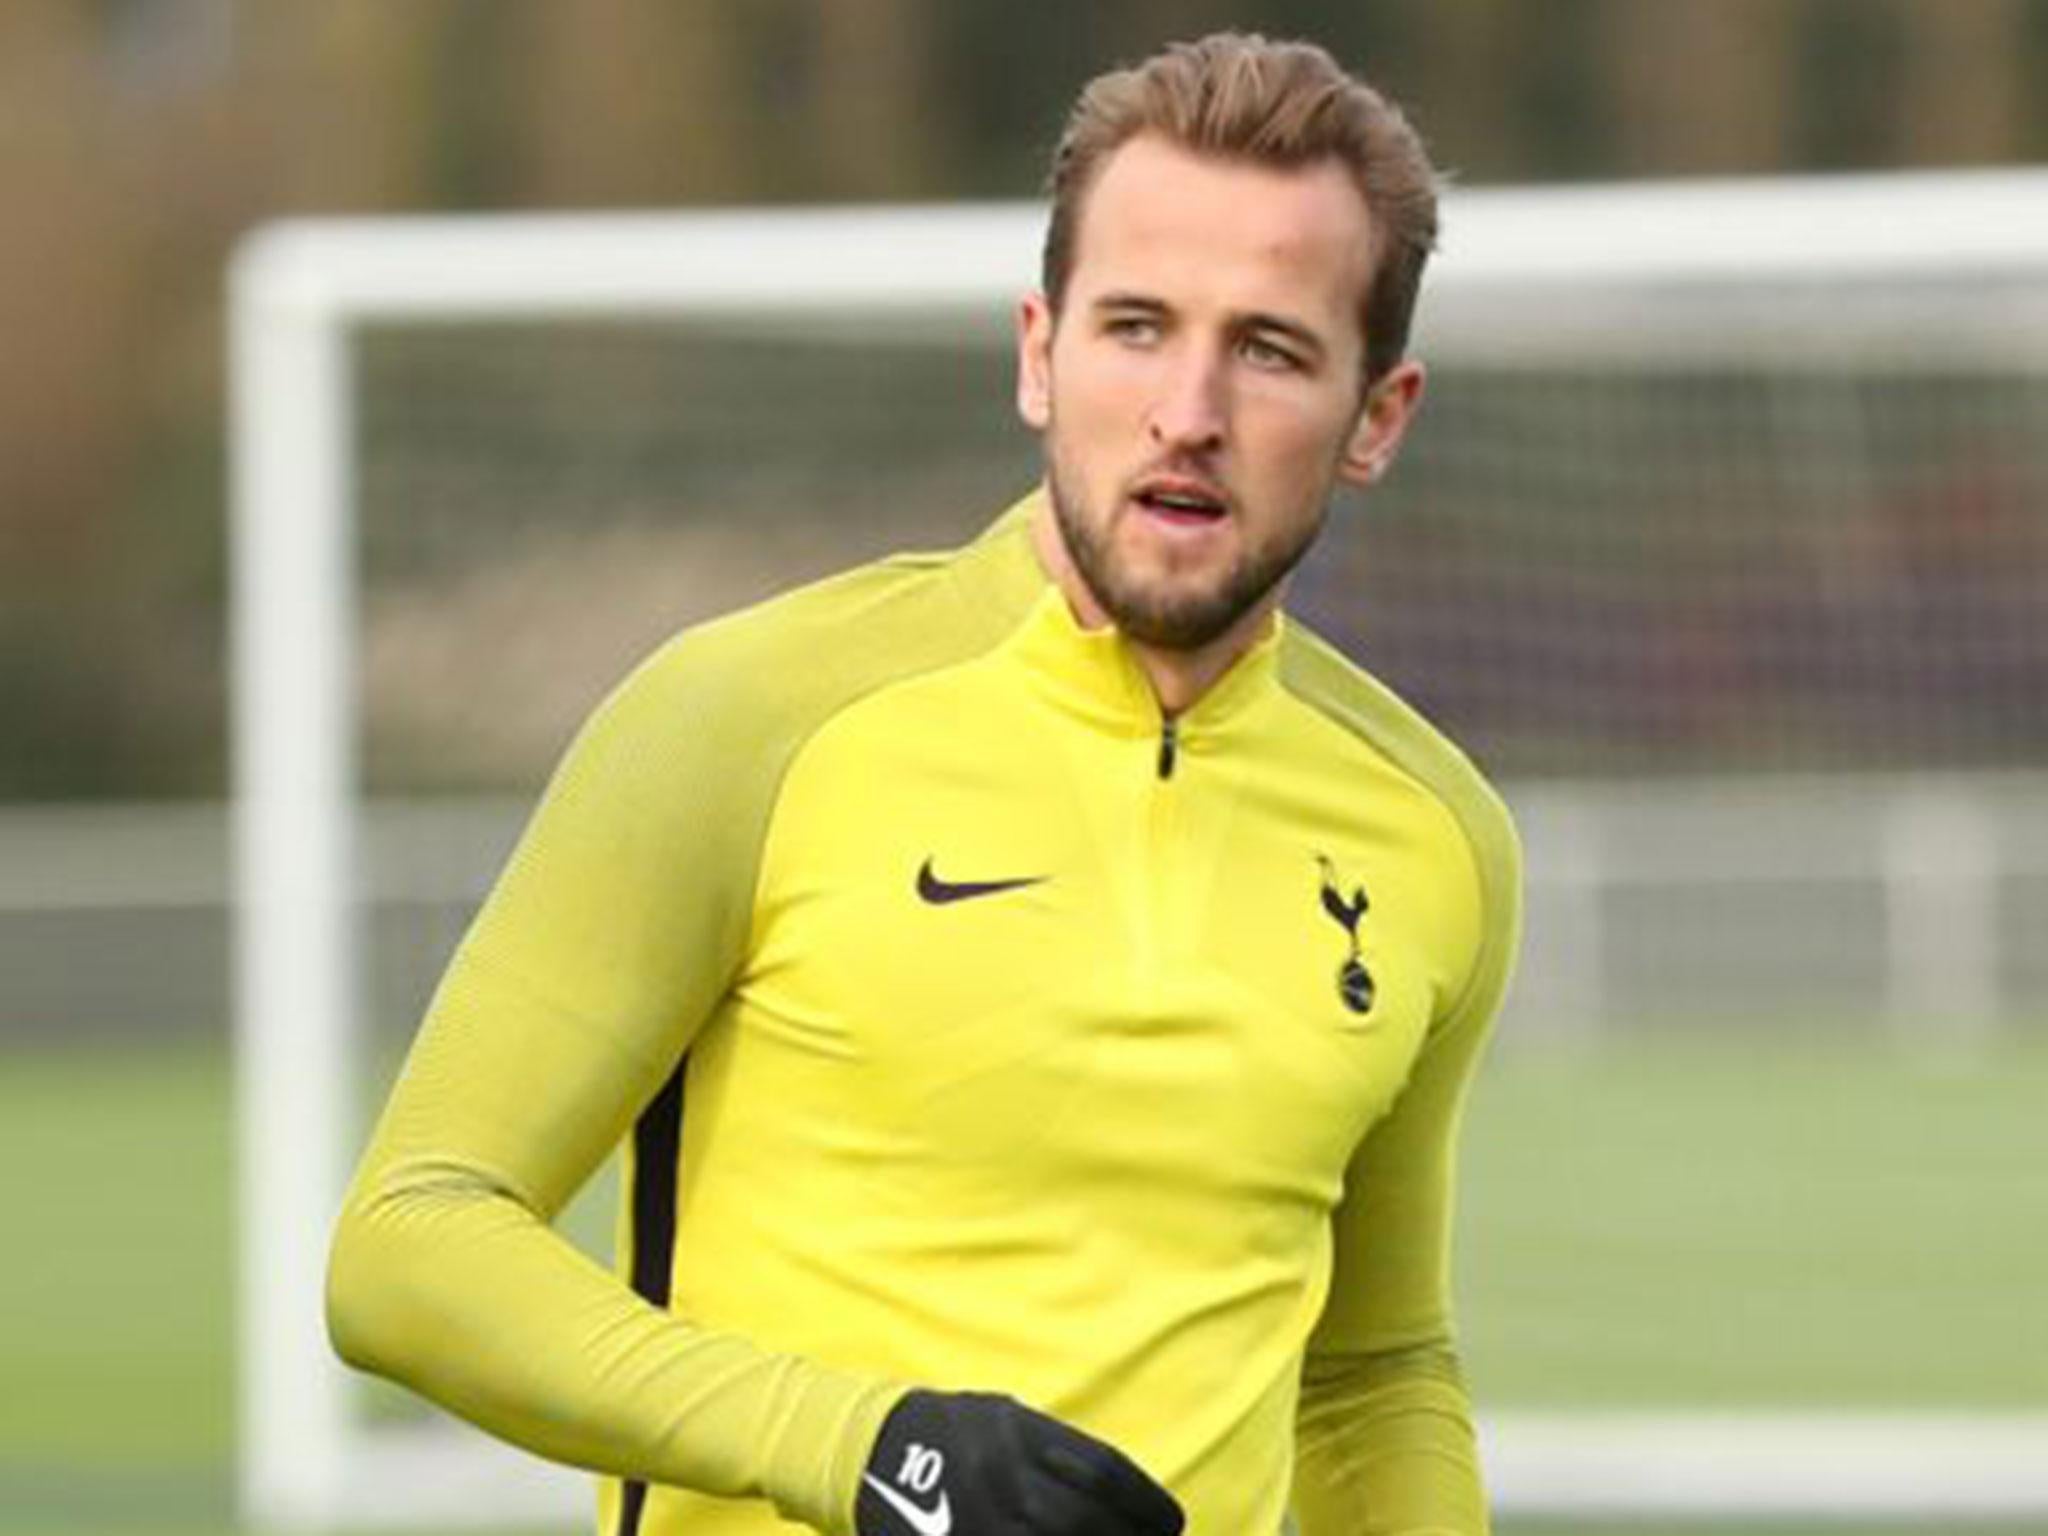 Harry Kane has returned to training with Tottenham following a hamstring injury